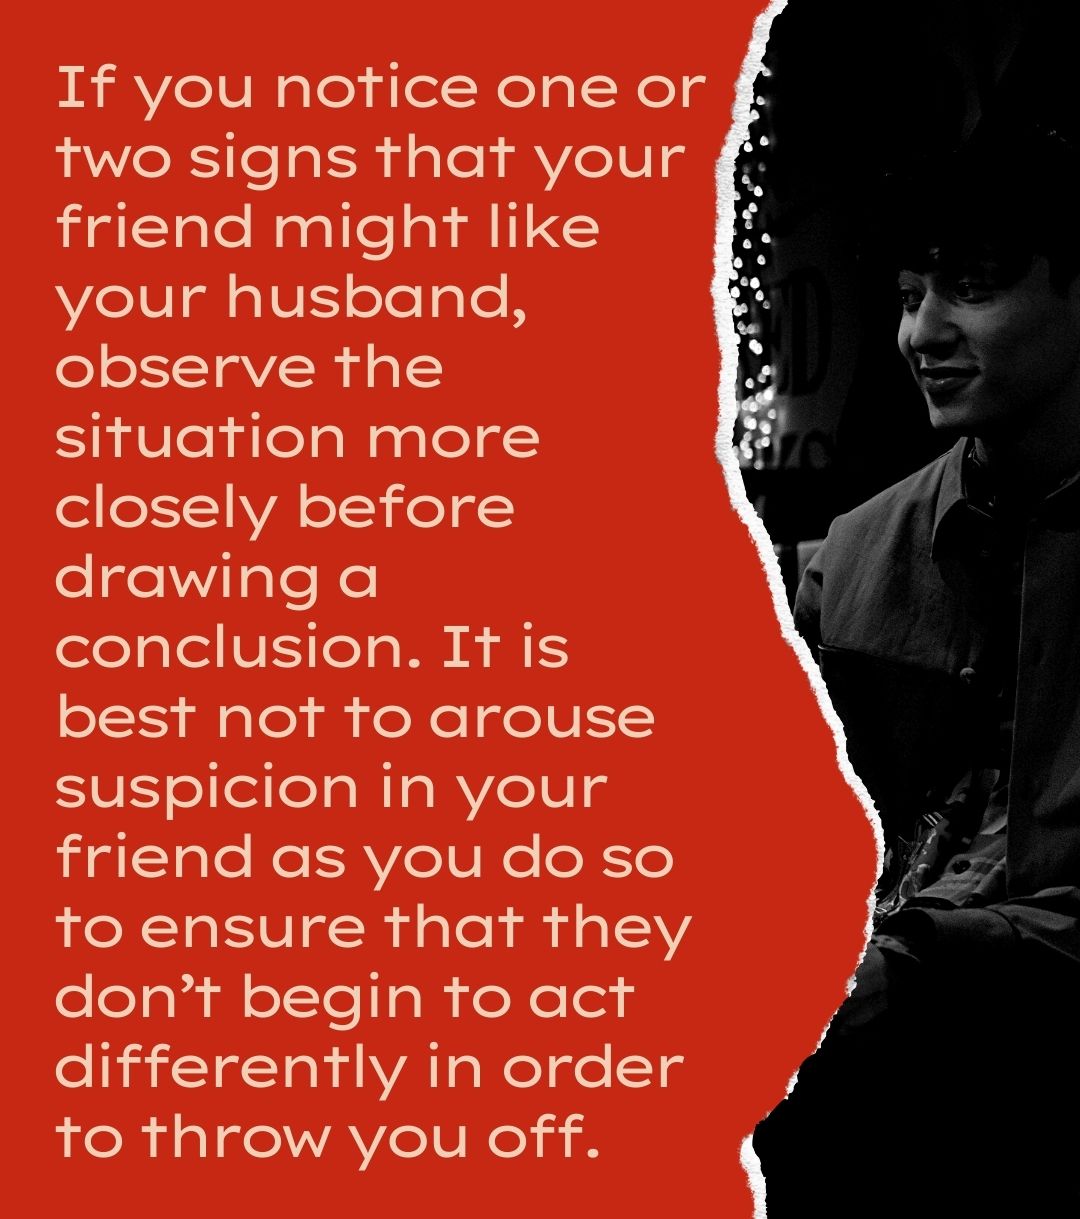 If you notice one or two signs that your friend might like your husband, observe the situation more closely before drawing a conclusion. It is best not to arouse suspicion in your friend as you do so to ensure that they don’t begin to act differently in order to throw you off.